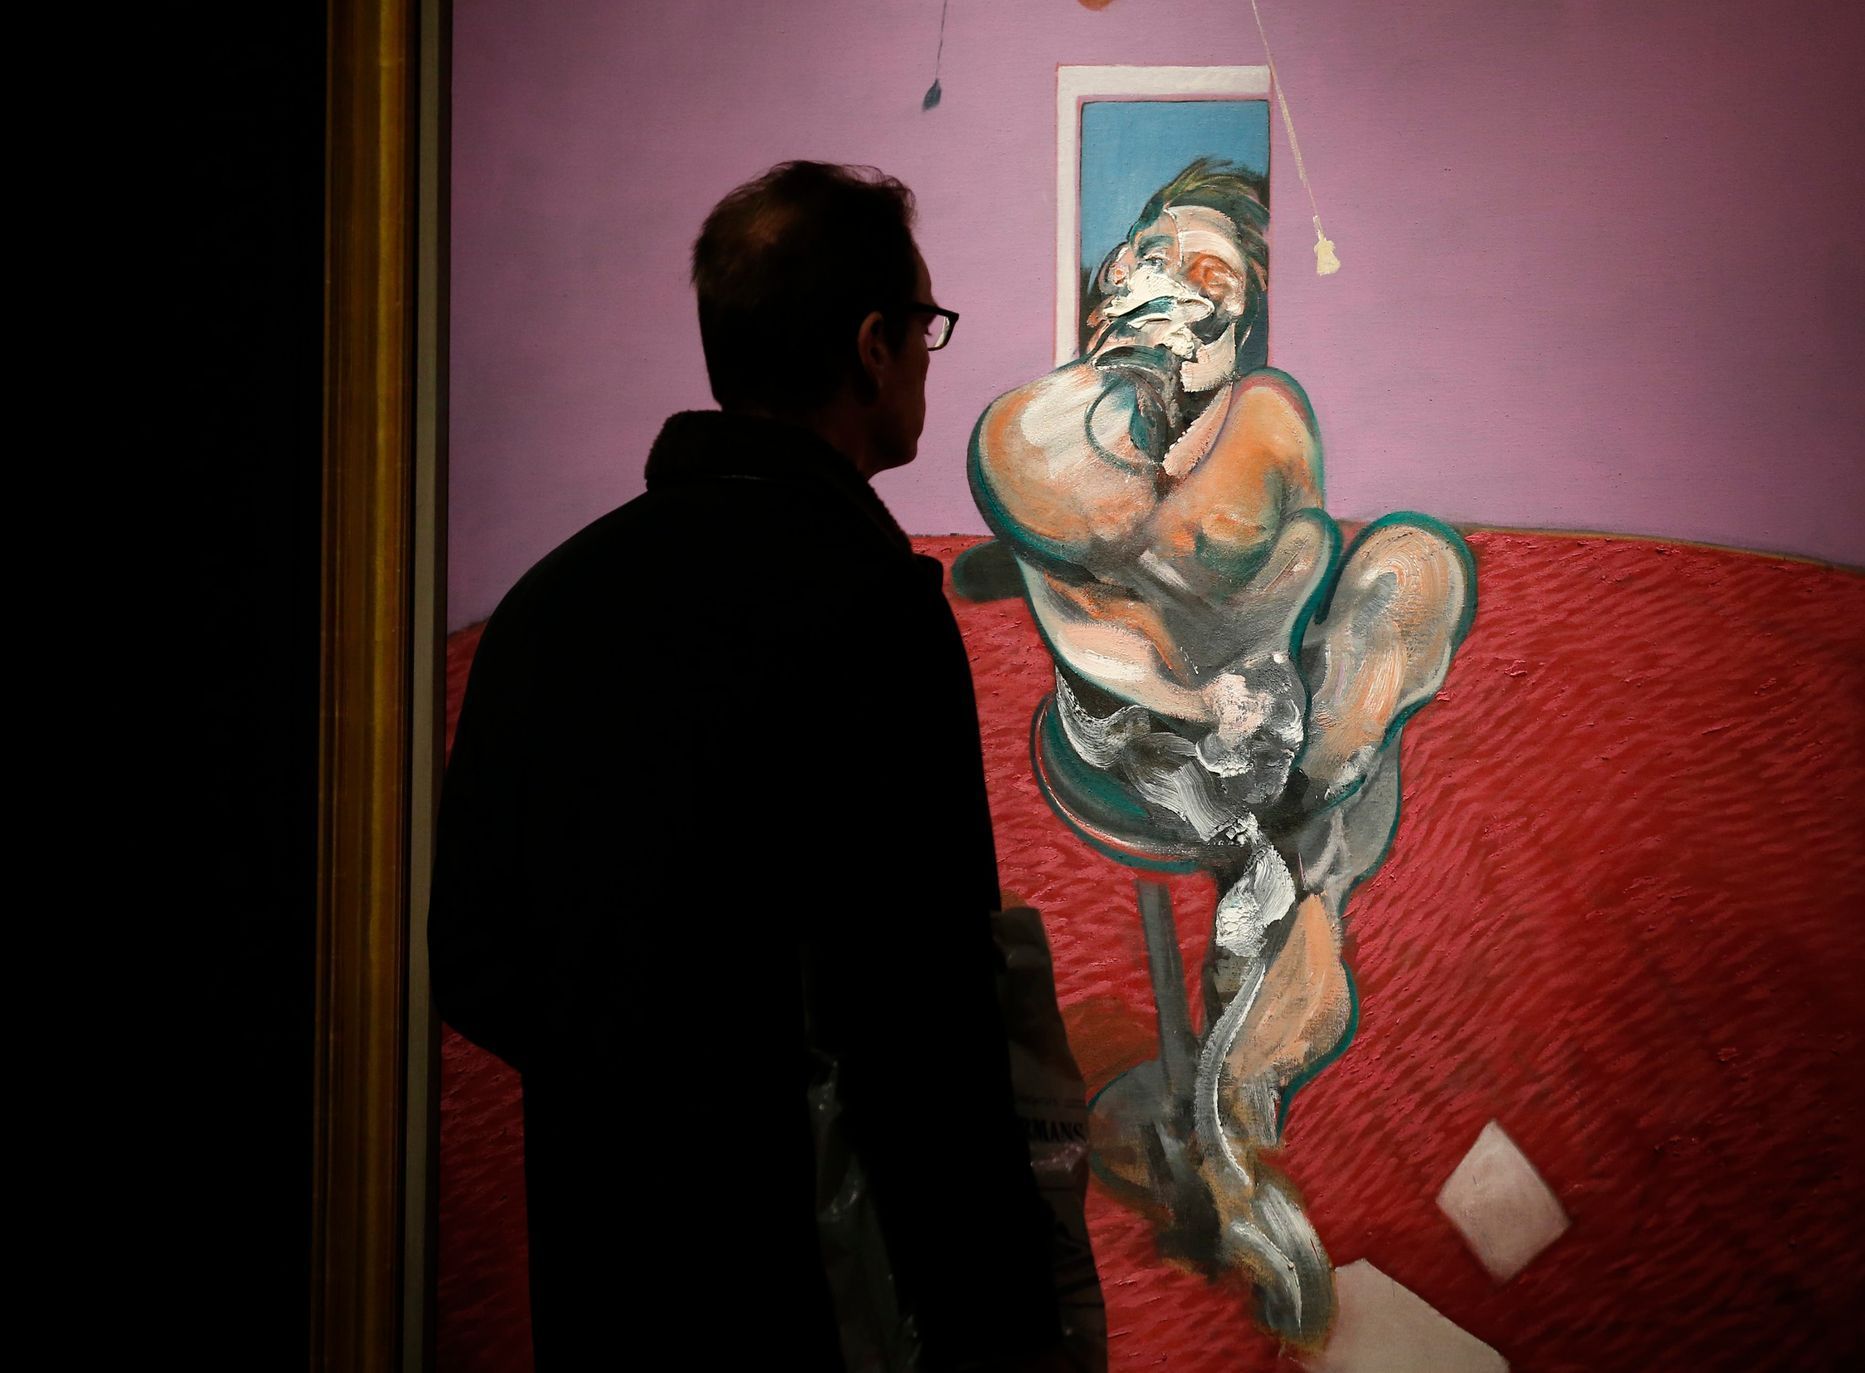 A visitor looks at &quot;Portrait of George Dyer Talking&quot; by Francis Bacon in 1966 on display at Christie's in London